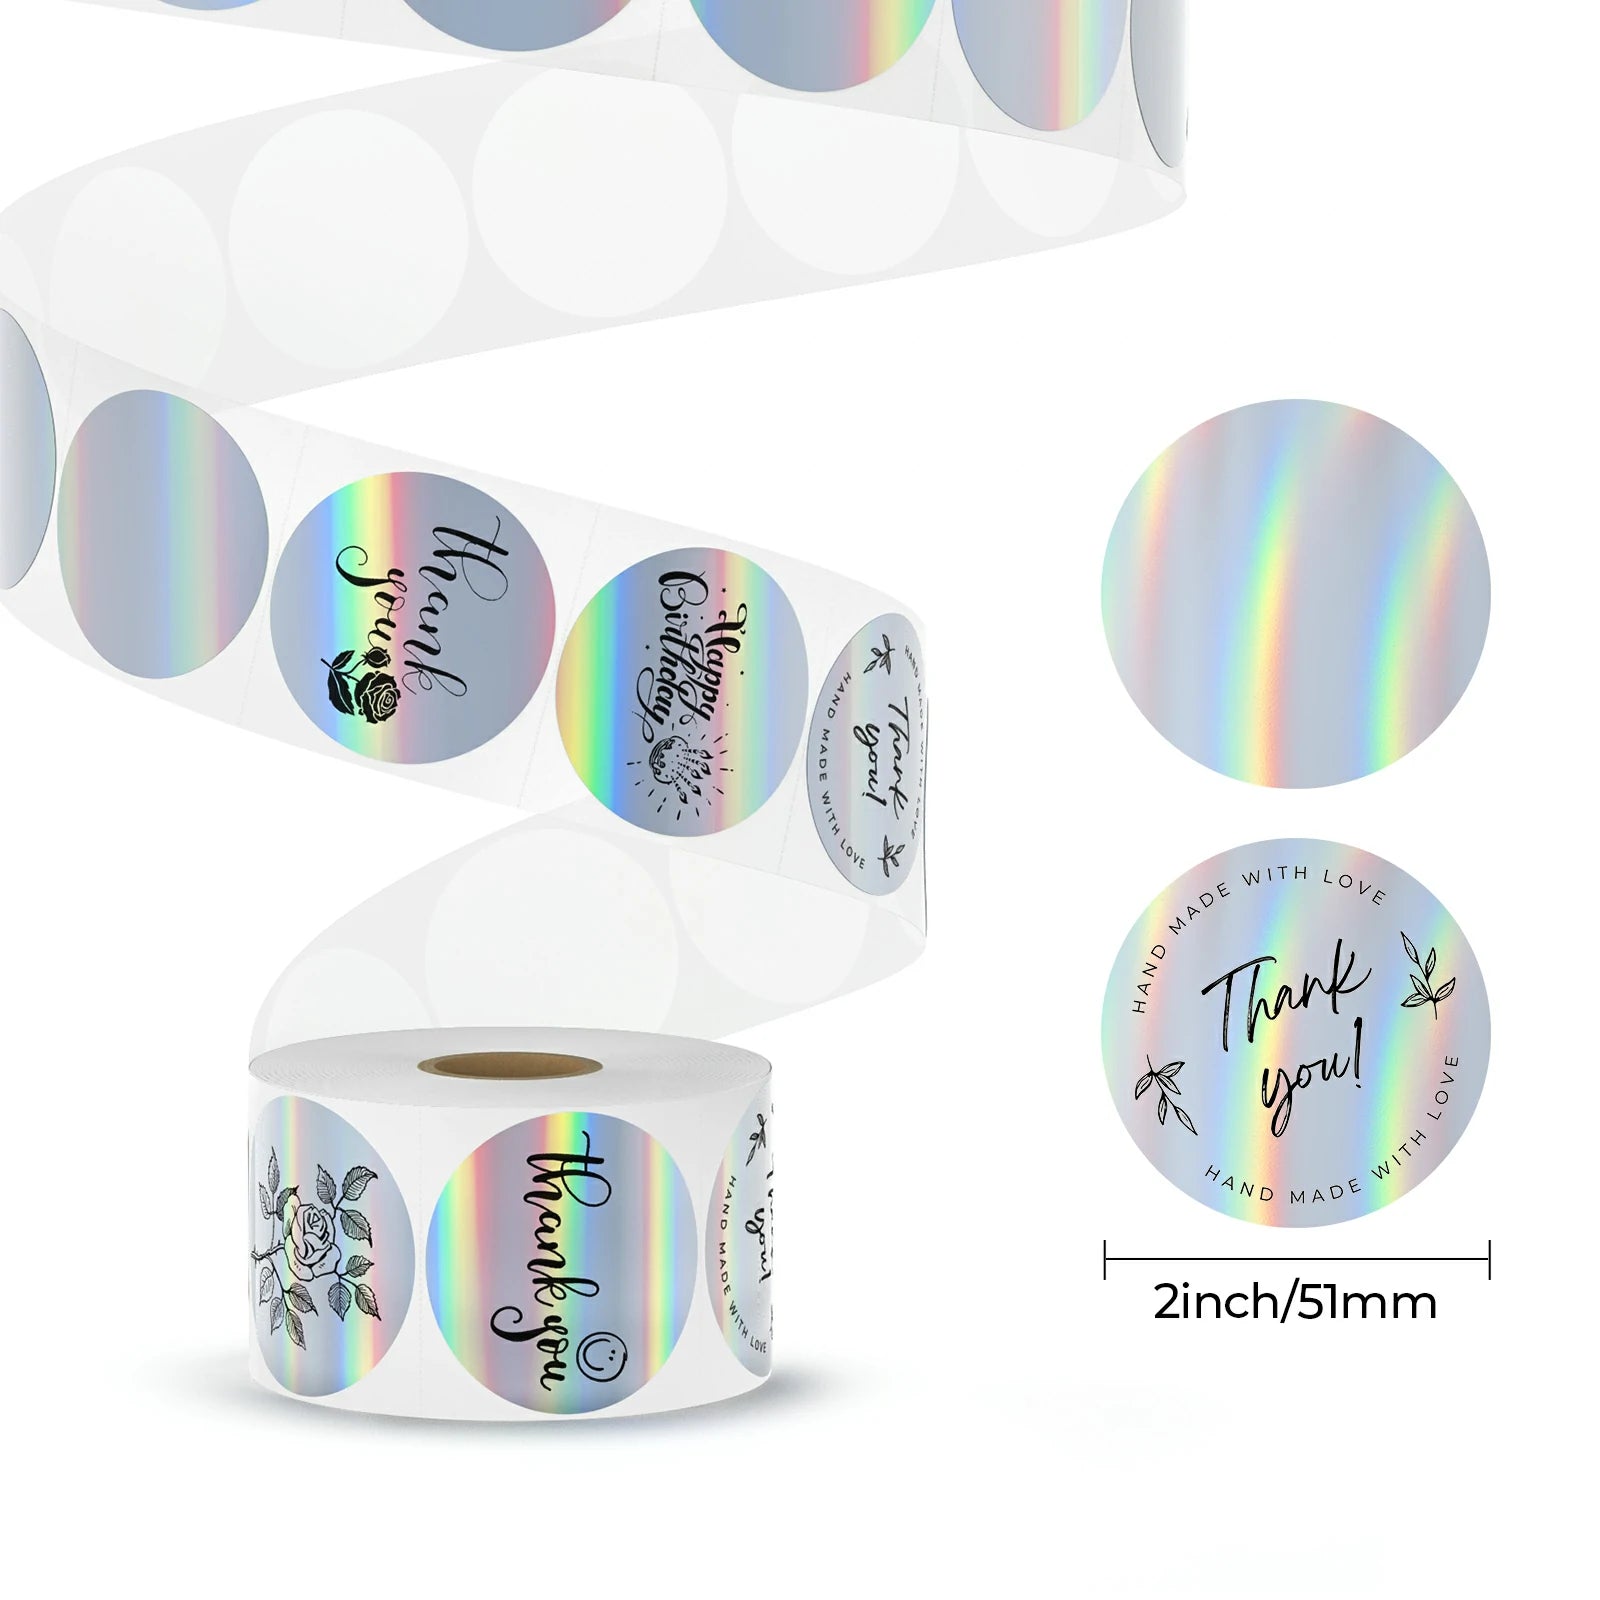 MUNBYN  holo thermal labels are 51mm x 51mm.